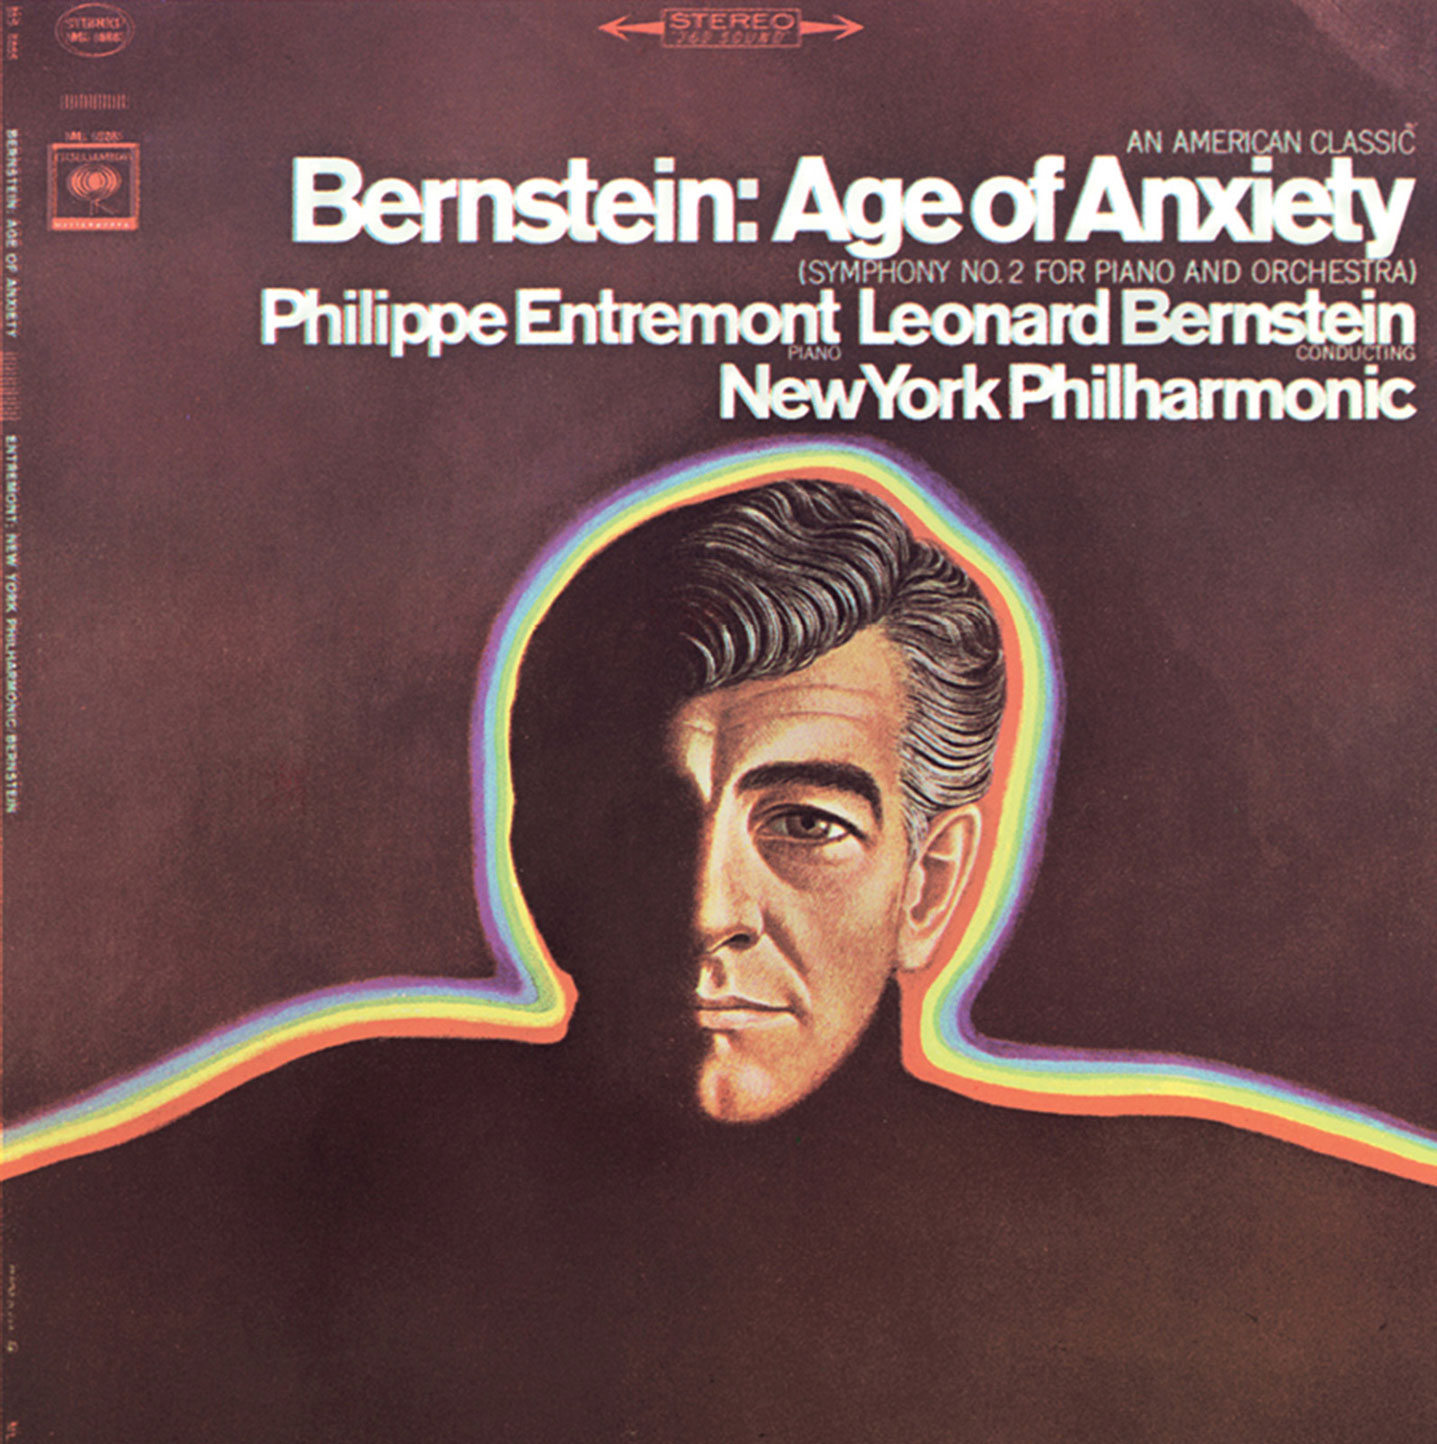 An LP cover of Leonard Bernstein’s “Age of Anxiety” from circa nineteen sixty-three, depicting Bernstein surrounded by fluorescent lines of color.